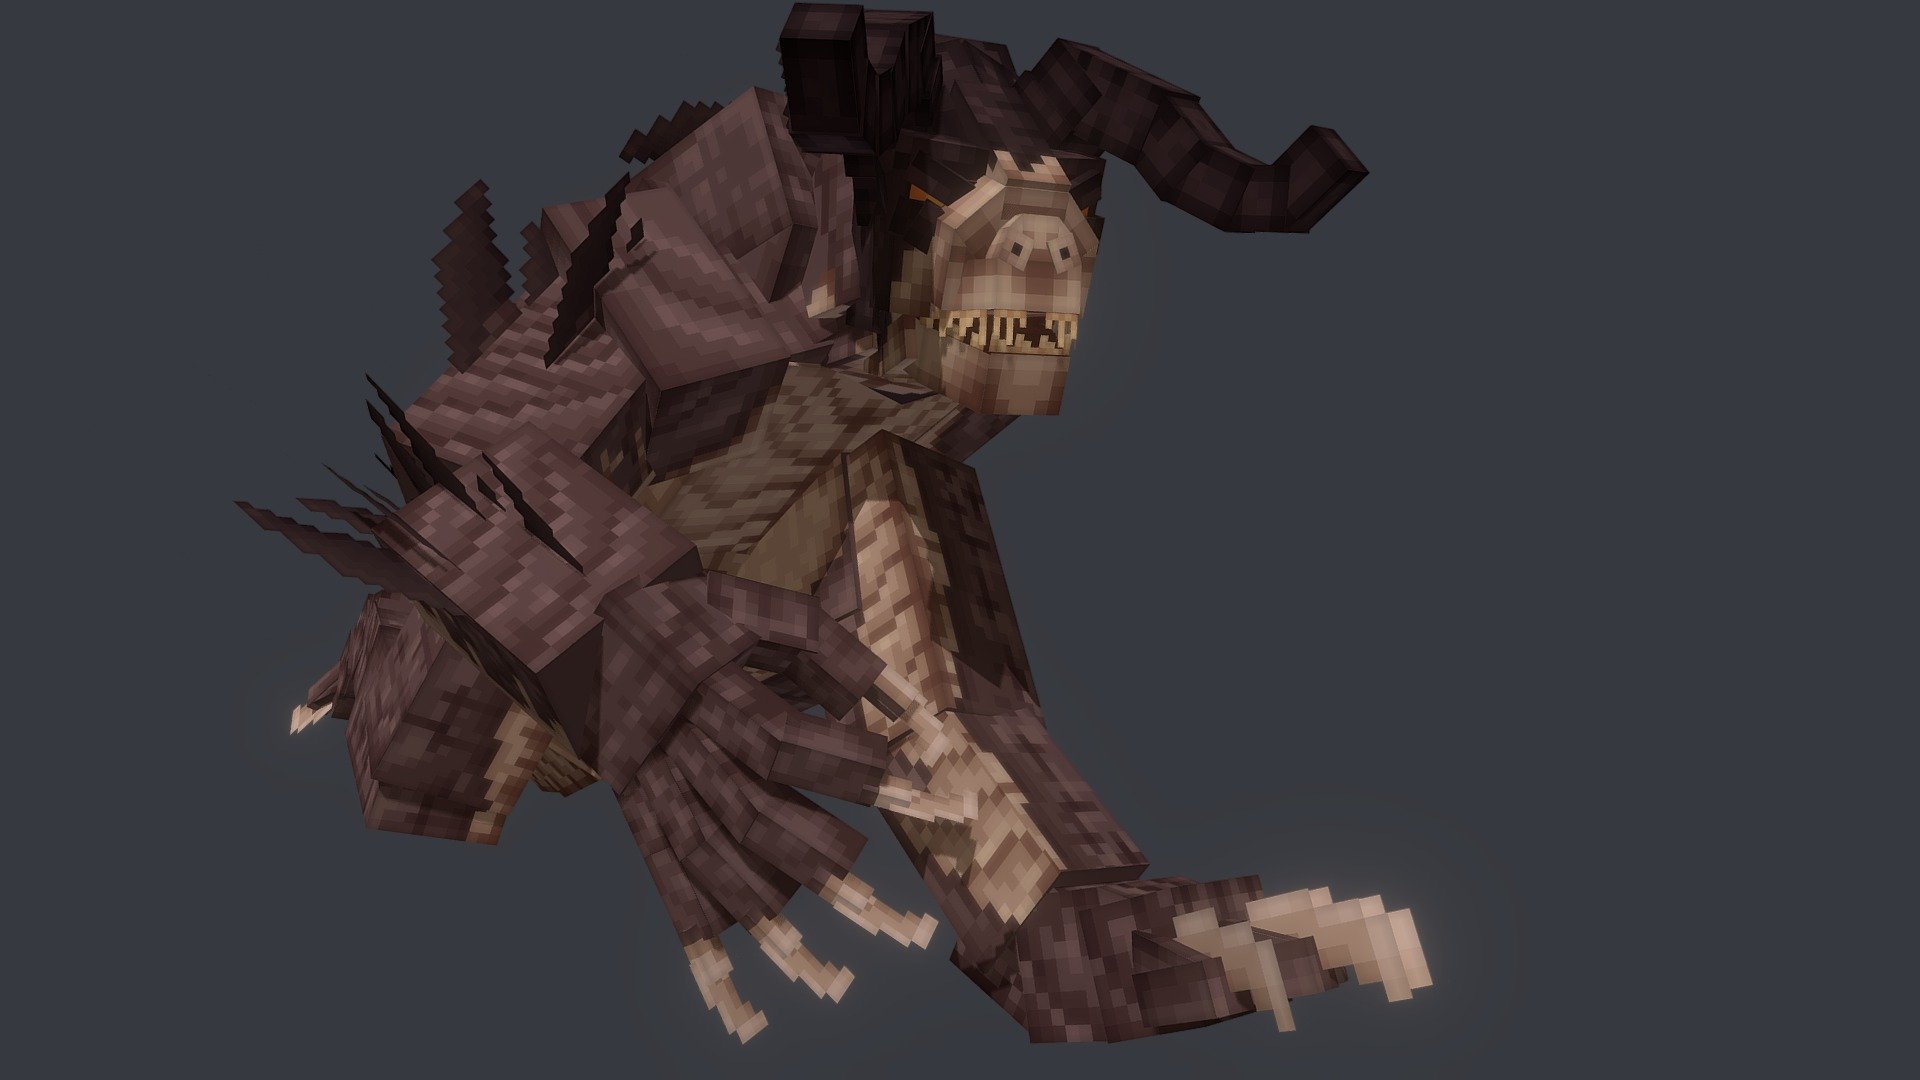 Deathclaw from Fallout series - Deathclaw - 3D model by Banathe 3d model